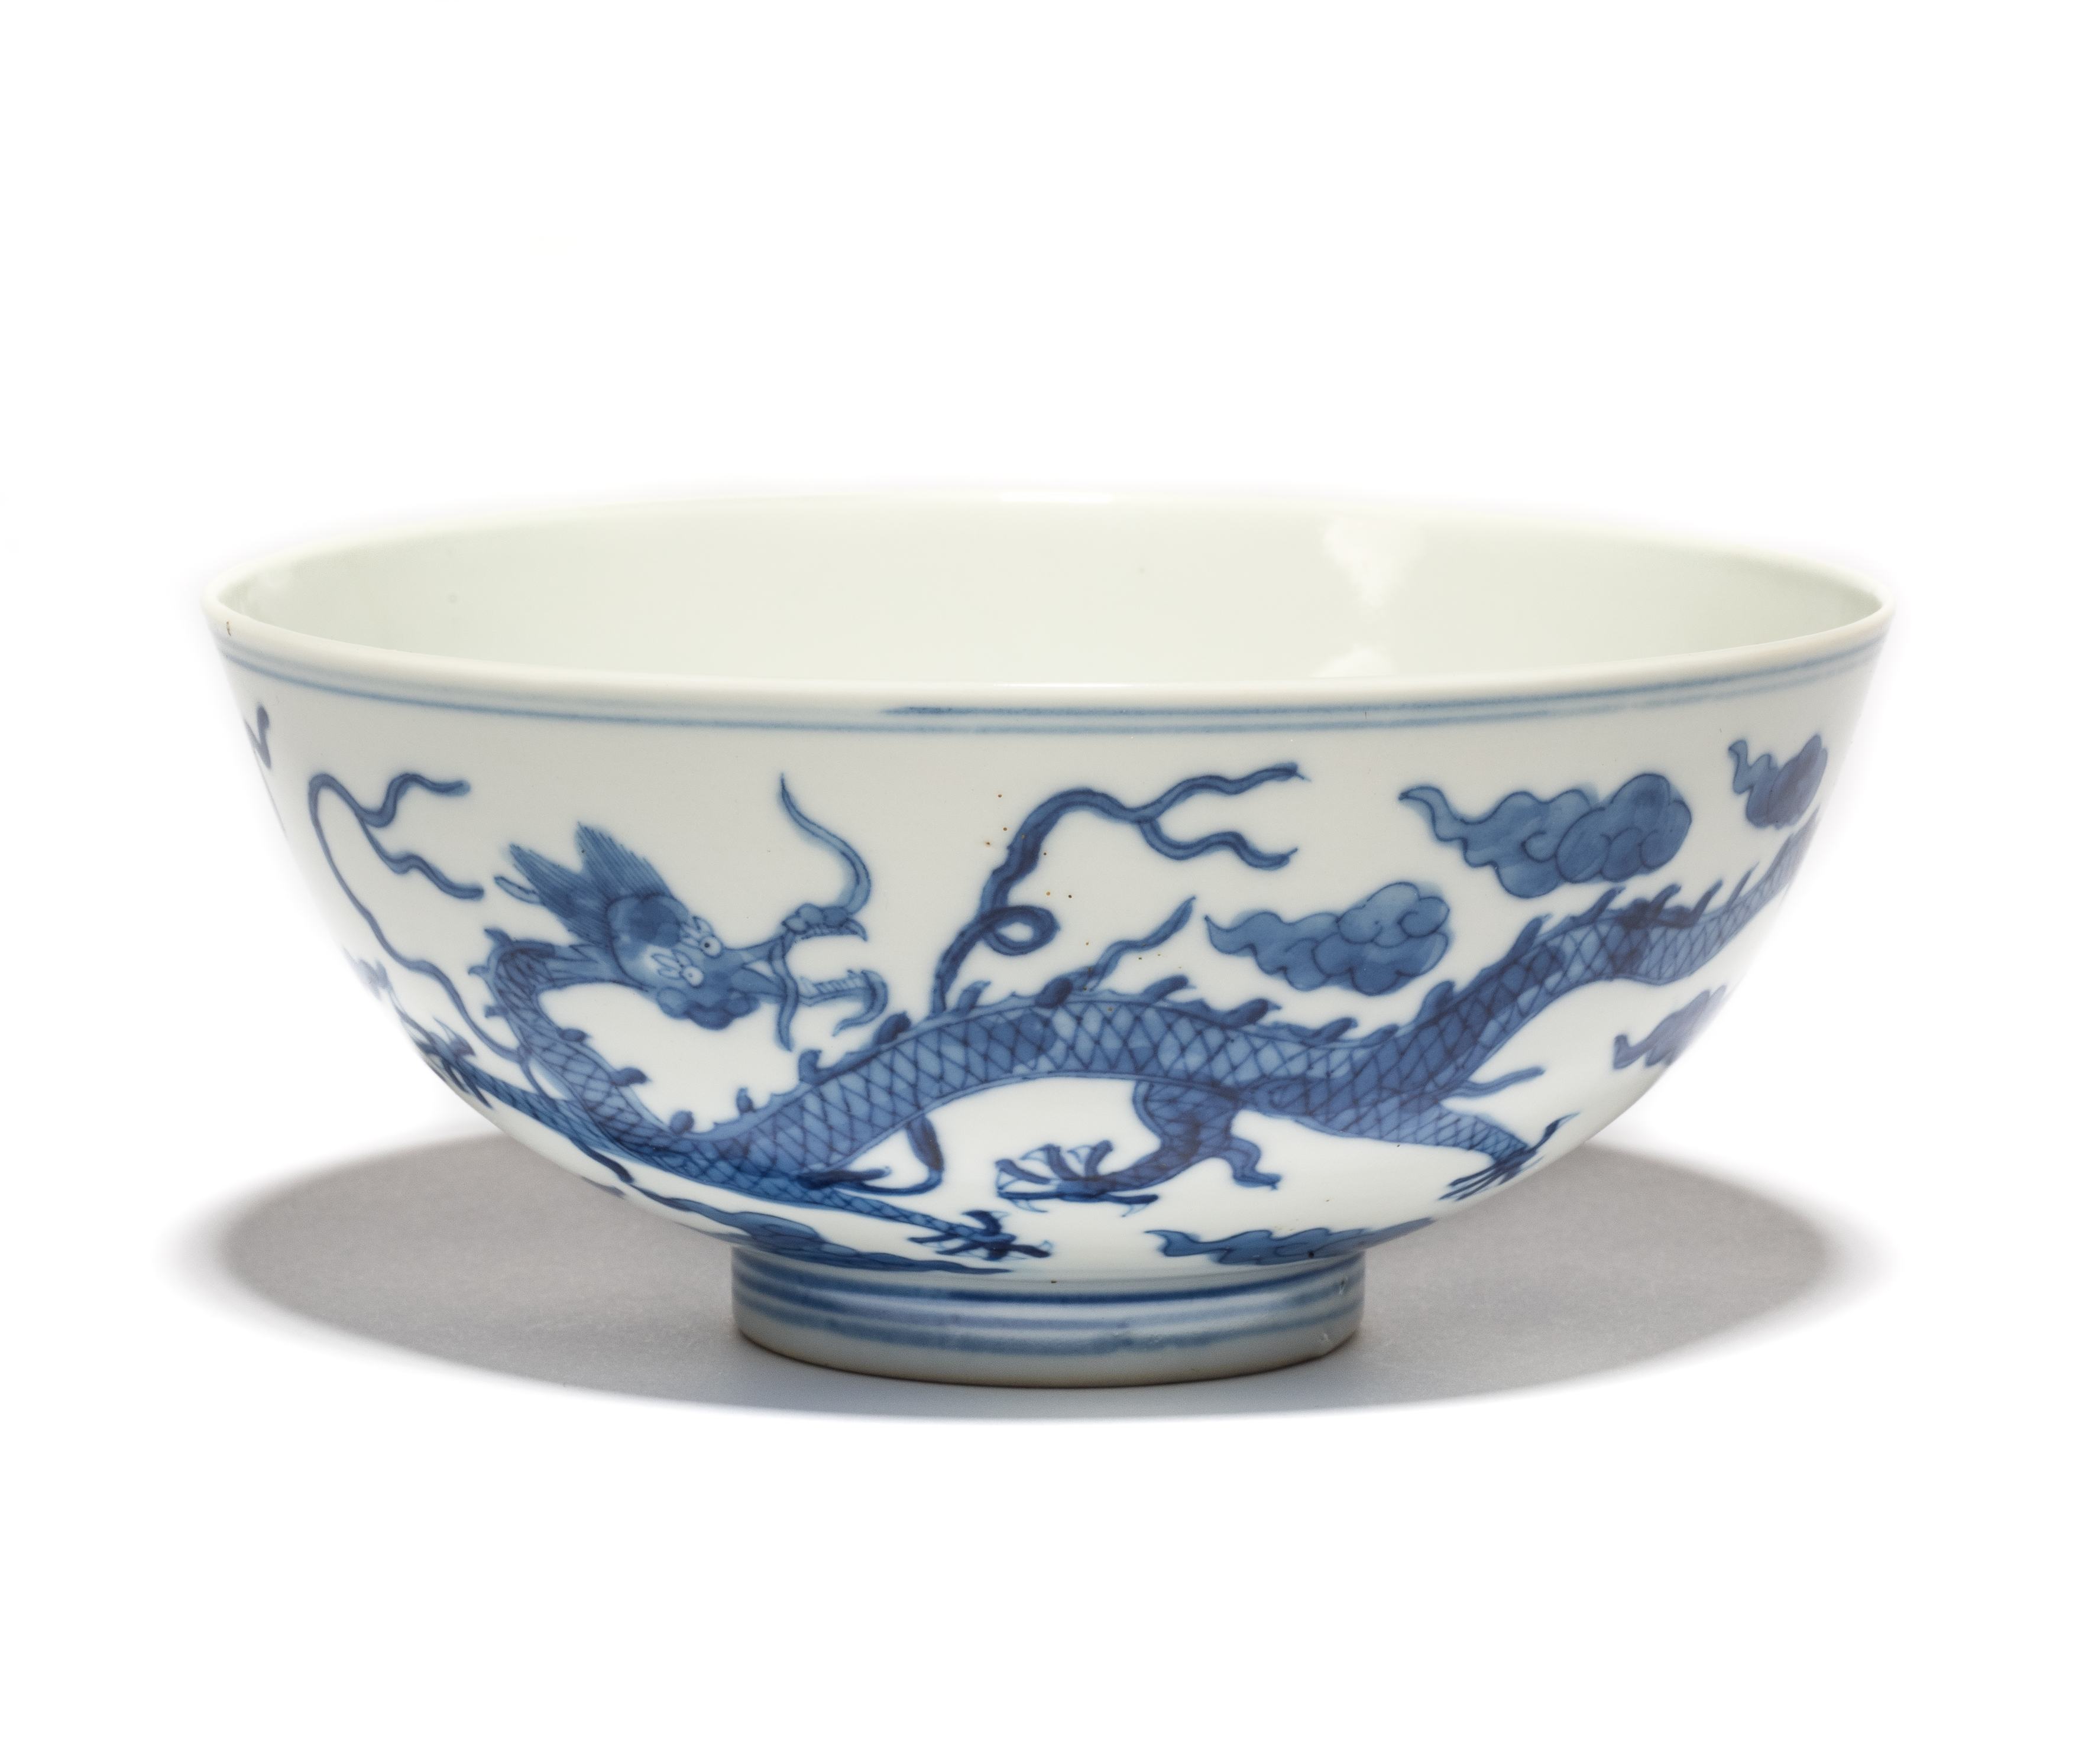 A CHINESE BLUE AND WHITE ~DRAGON~ BOWL, GUANGXU MARK AND PERIOD (1875-1908)